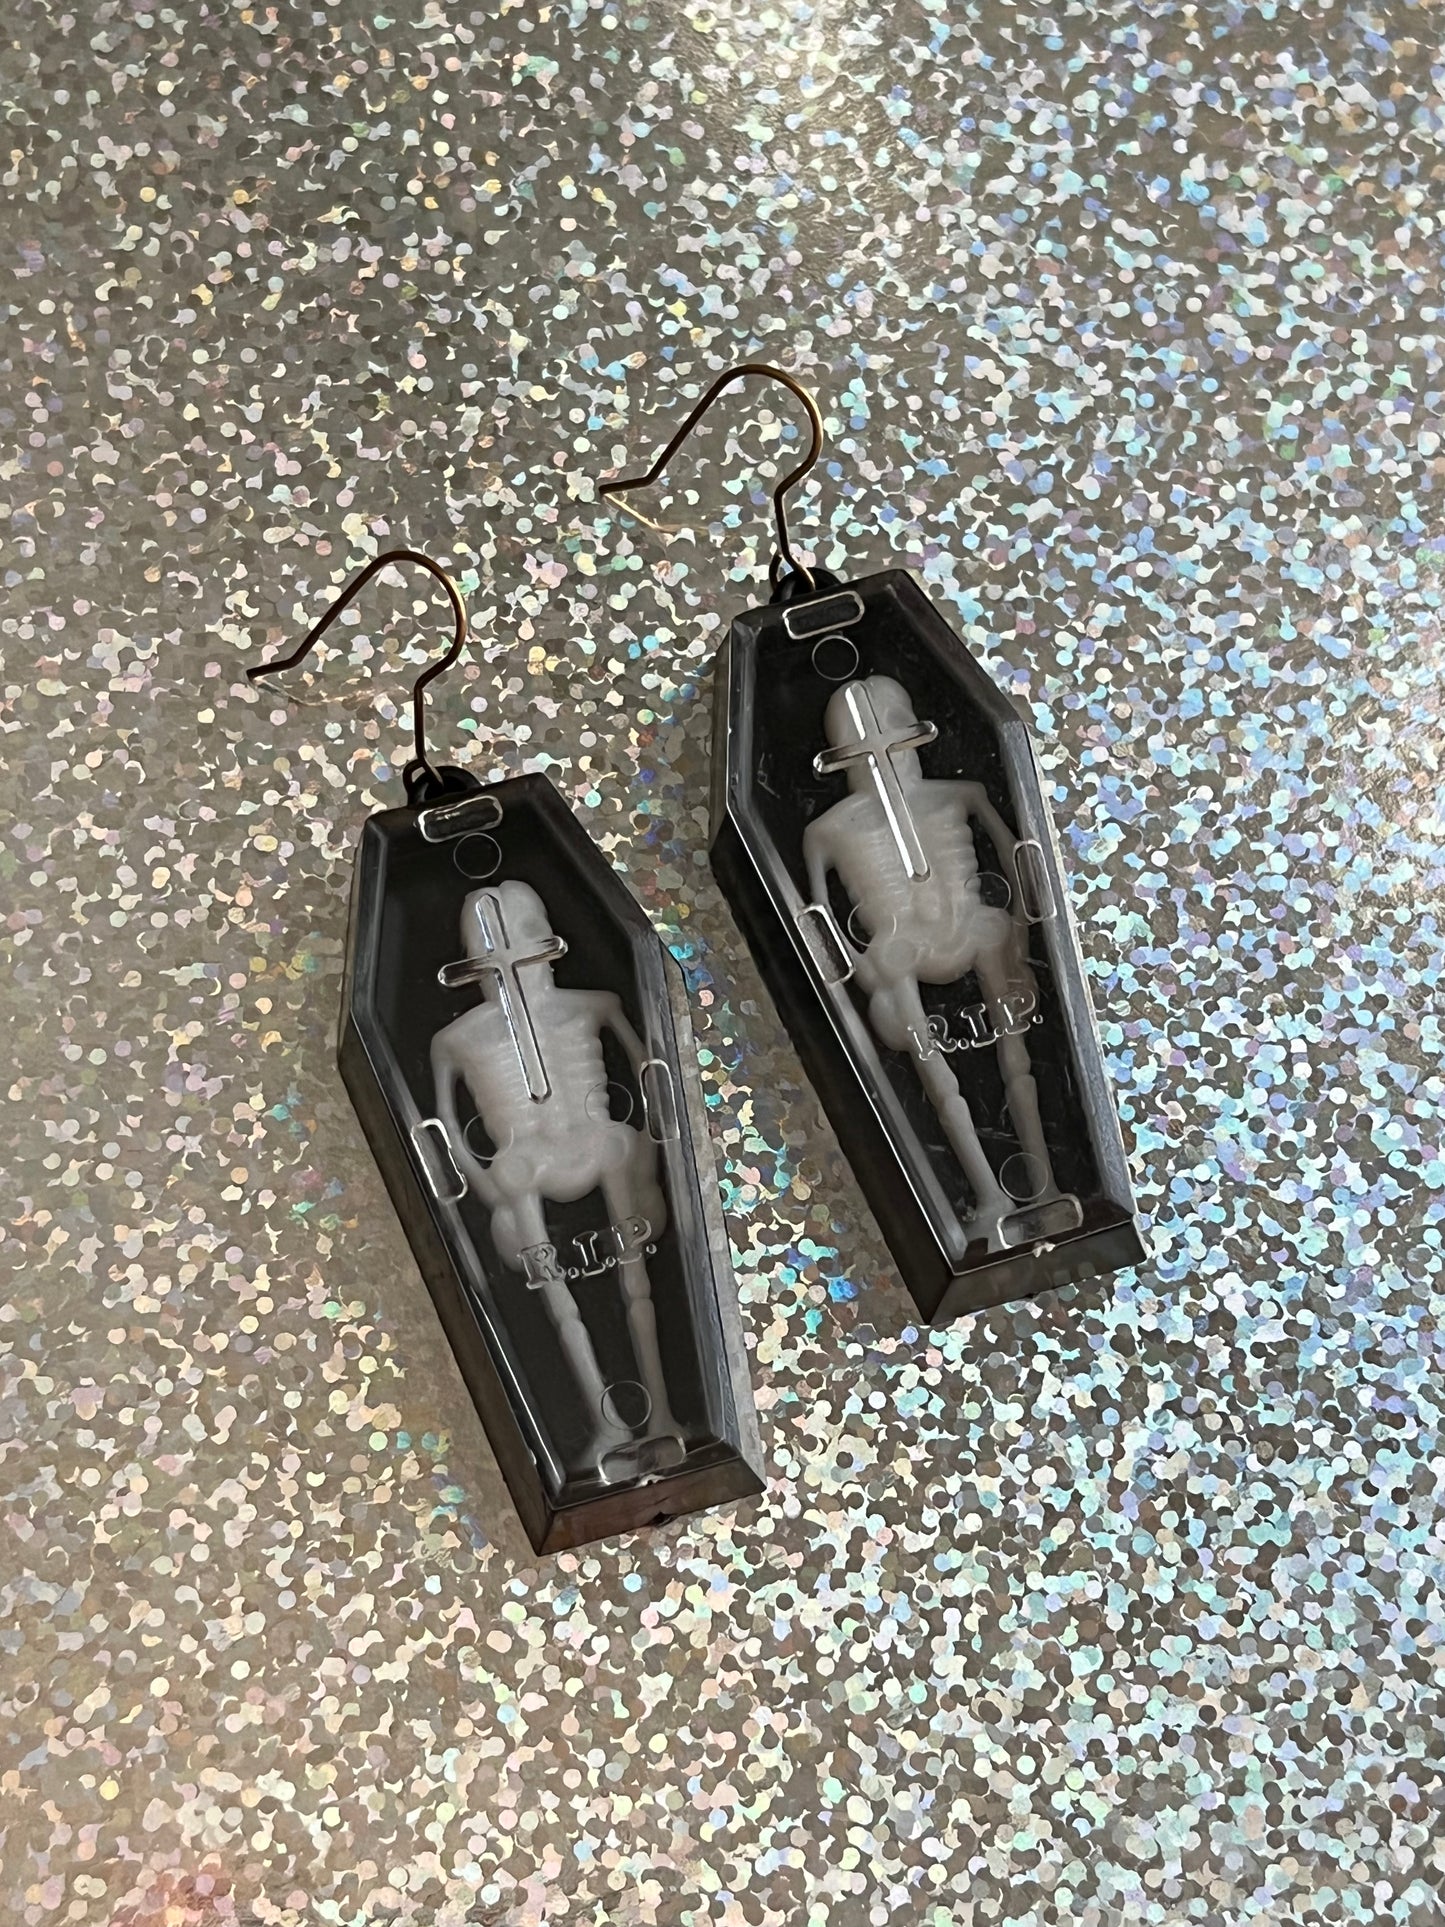 Coffin Earrings / Spooky / Halloween / Fall / Witchy / Babe